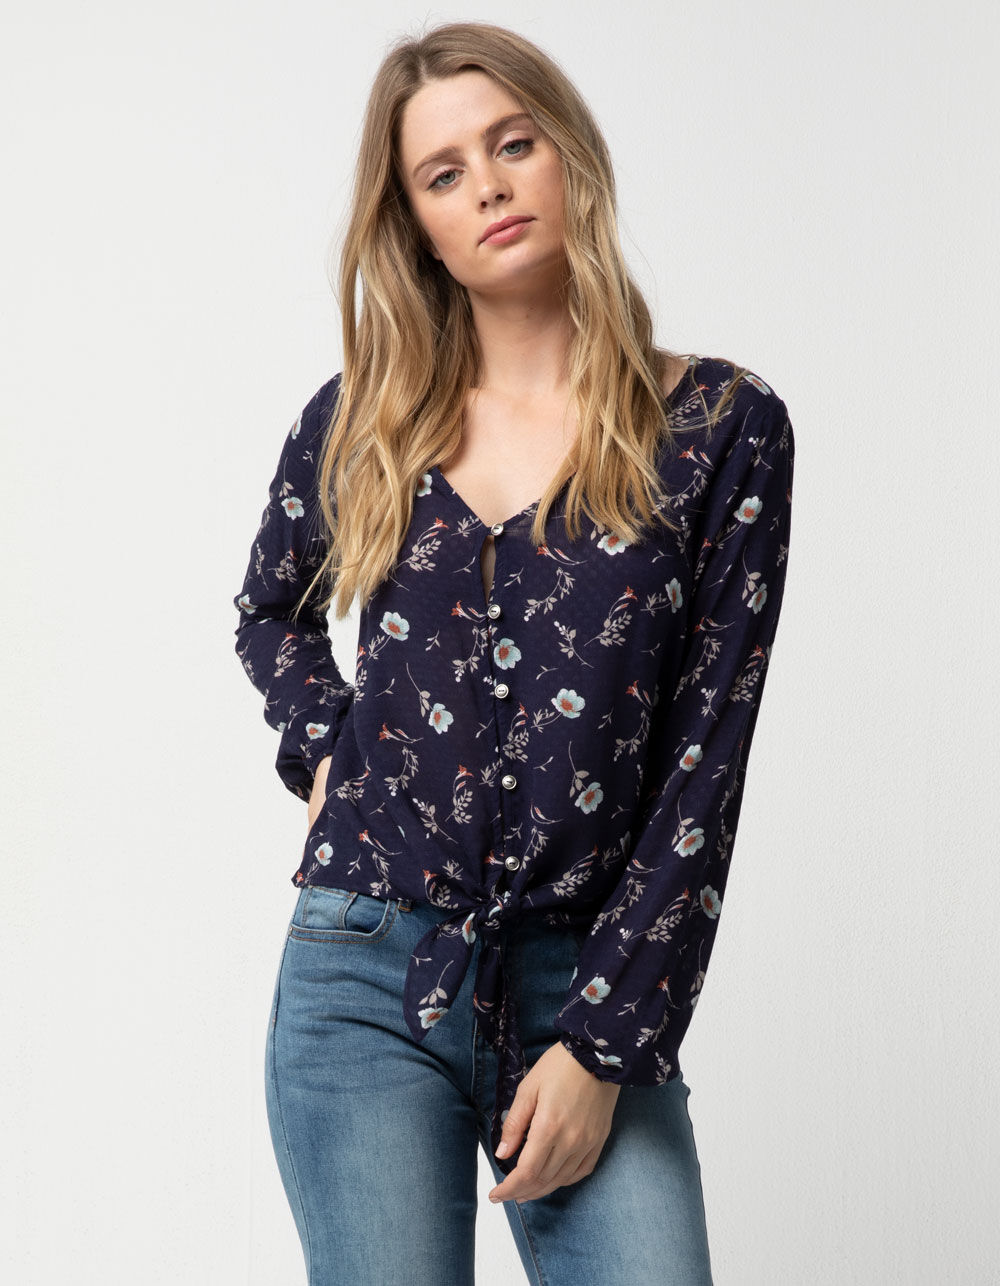 SKY AND SPARROW Button Front Floral Tie Front Womens Top - NAVY COMBO ...